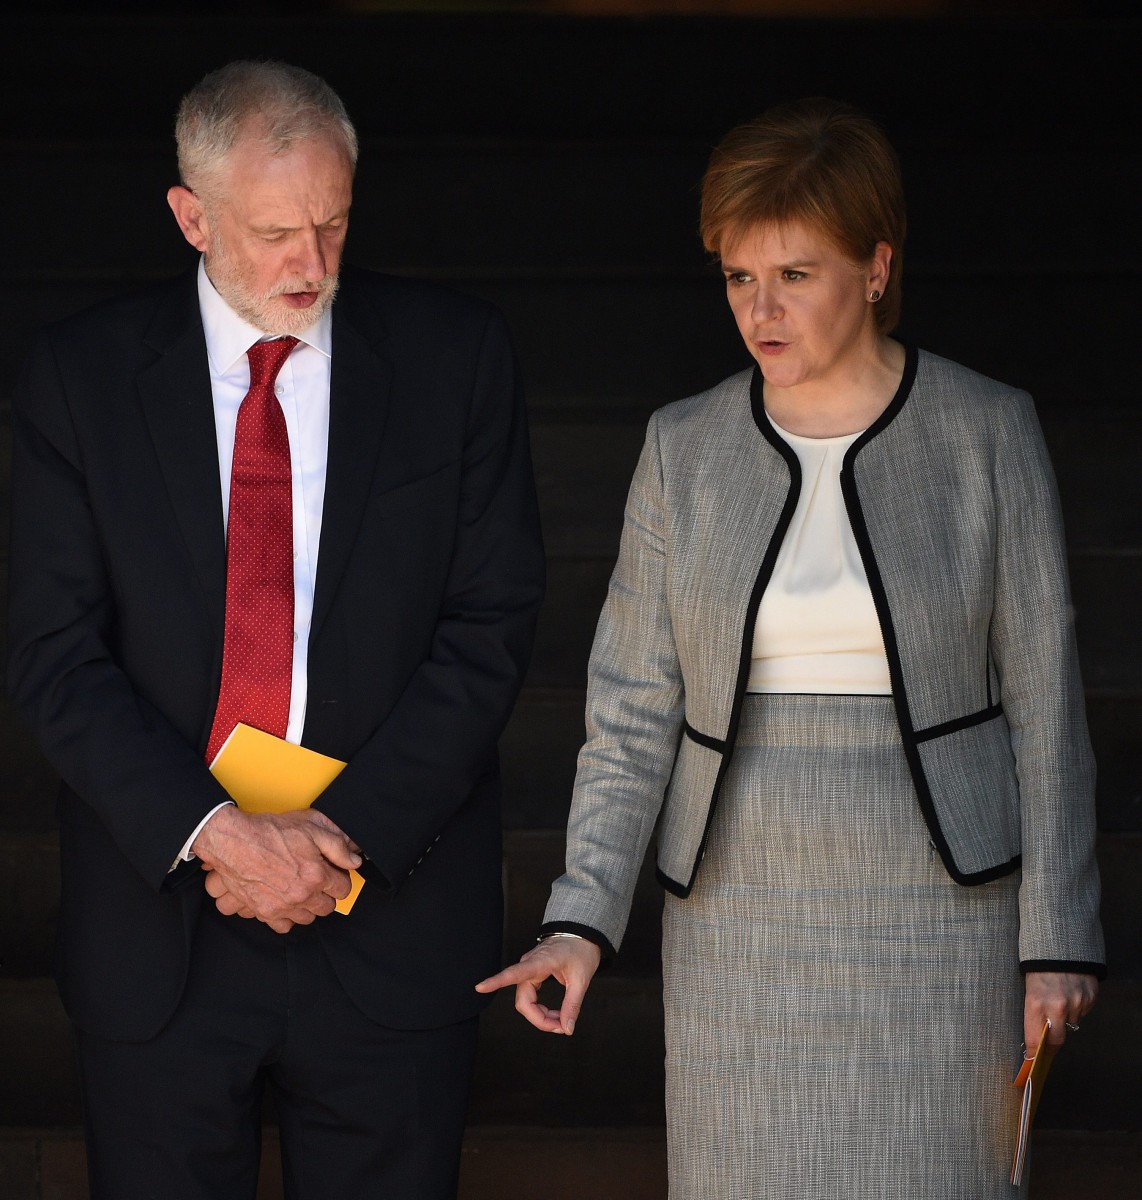 If Mr Corbyn grabs power after doing a deal with SNP leader Nicola Sturgeon we will face a second referendum on Scottish independence